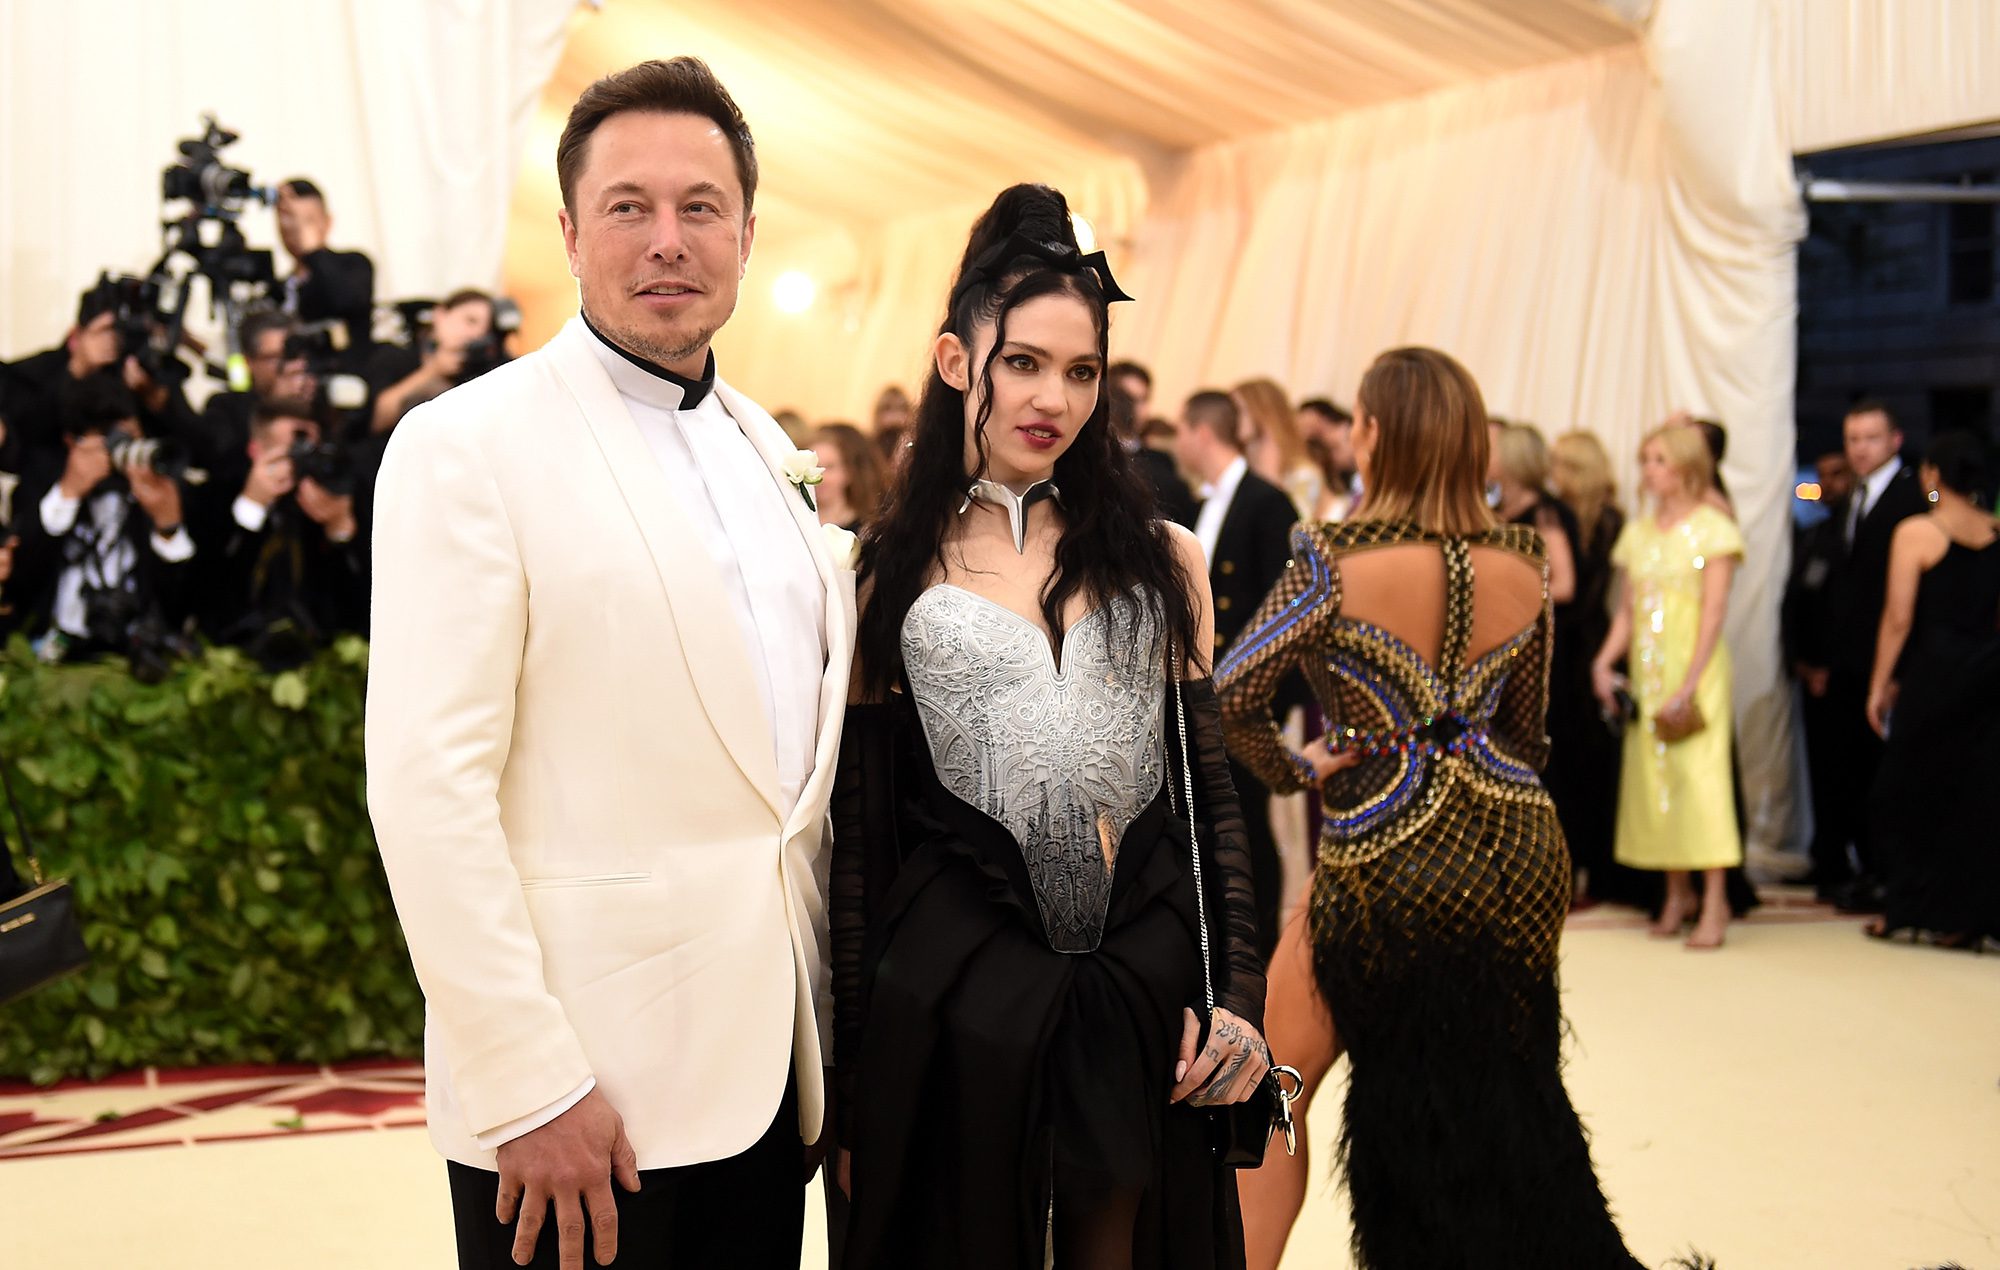 Why did Elon Musk and Grimm's Split?